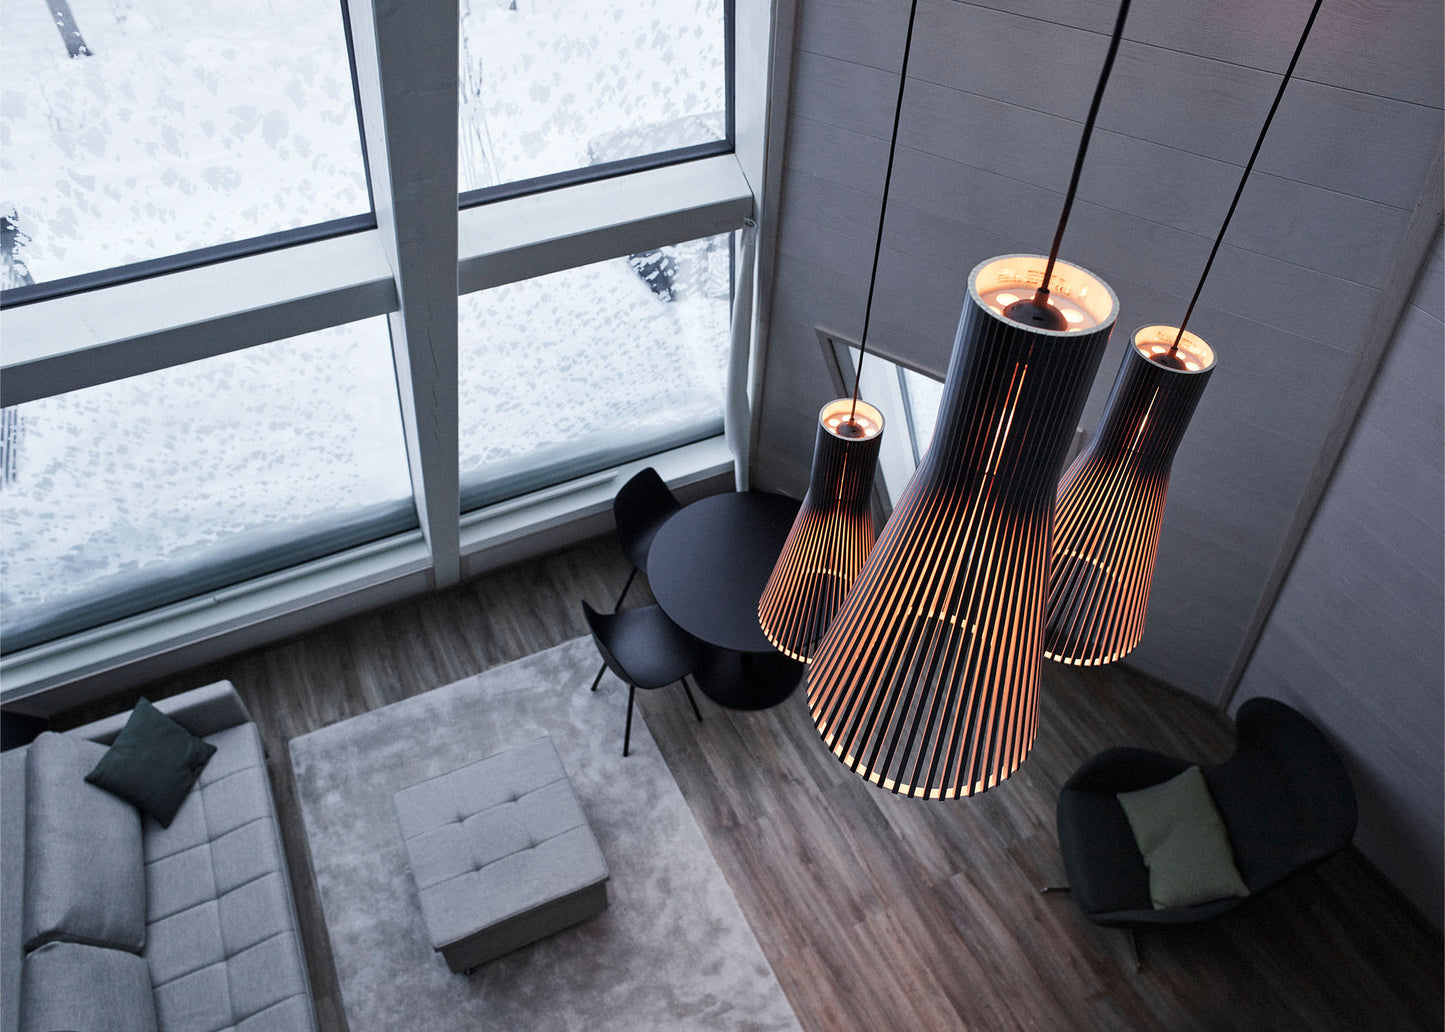 
                  
                    Secto 4200 Pendant - Black by Secto Design
                  
                